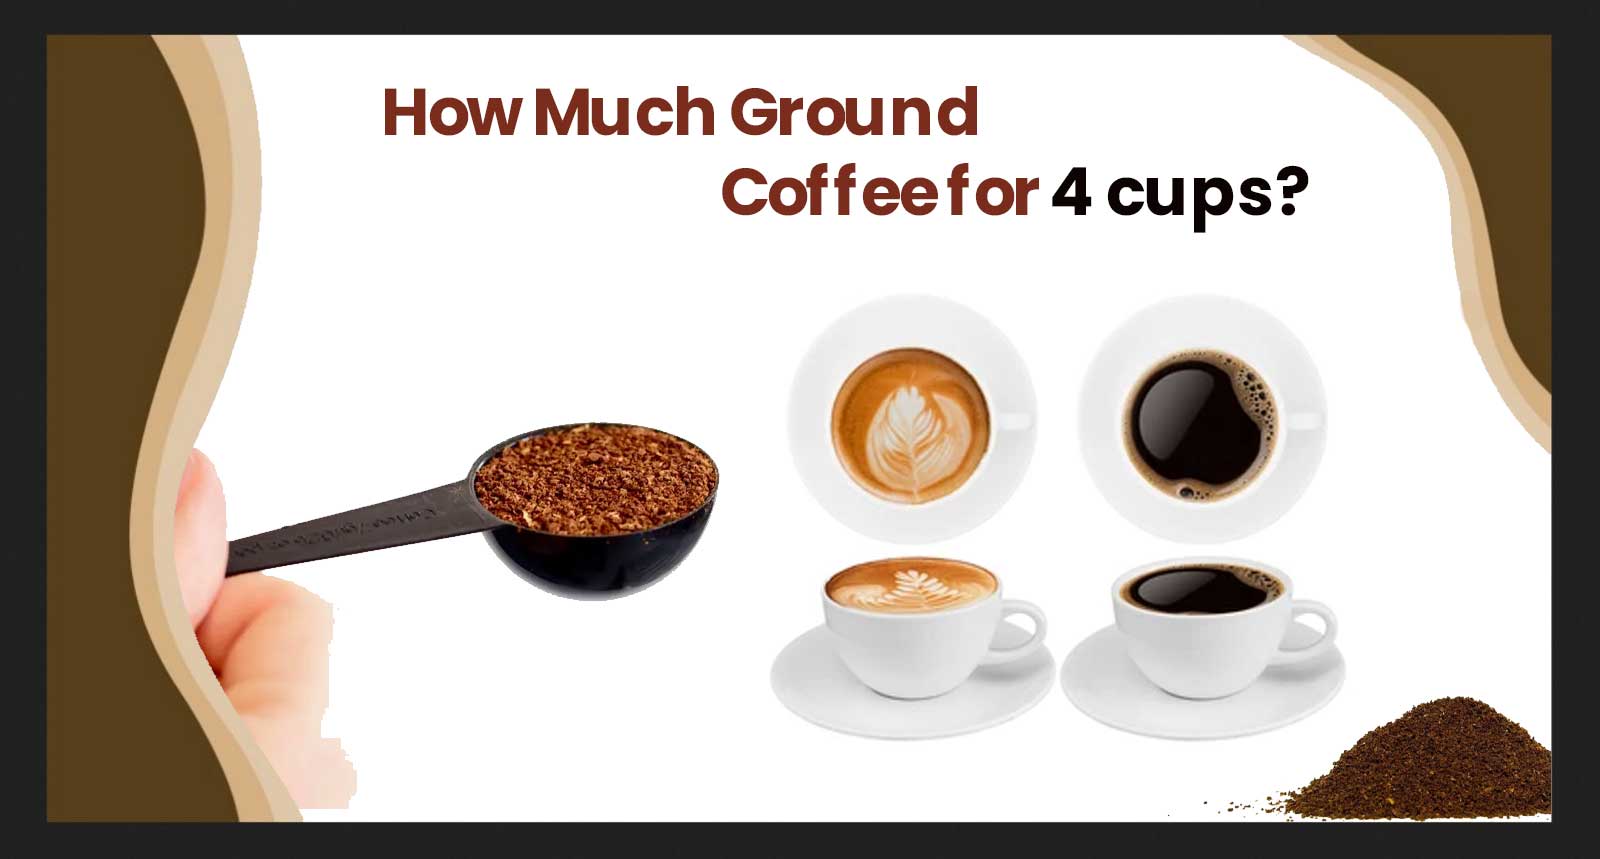 How Much Ground Coffee for 4 cups